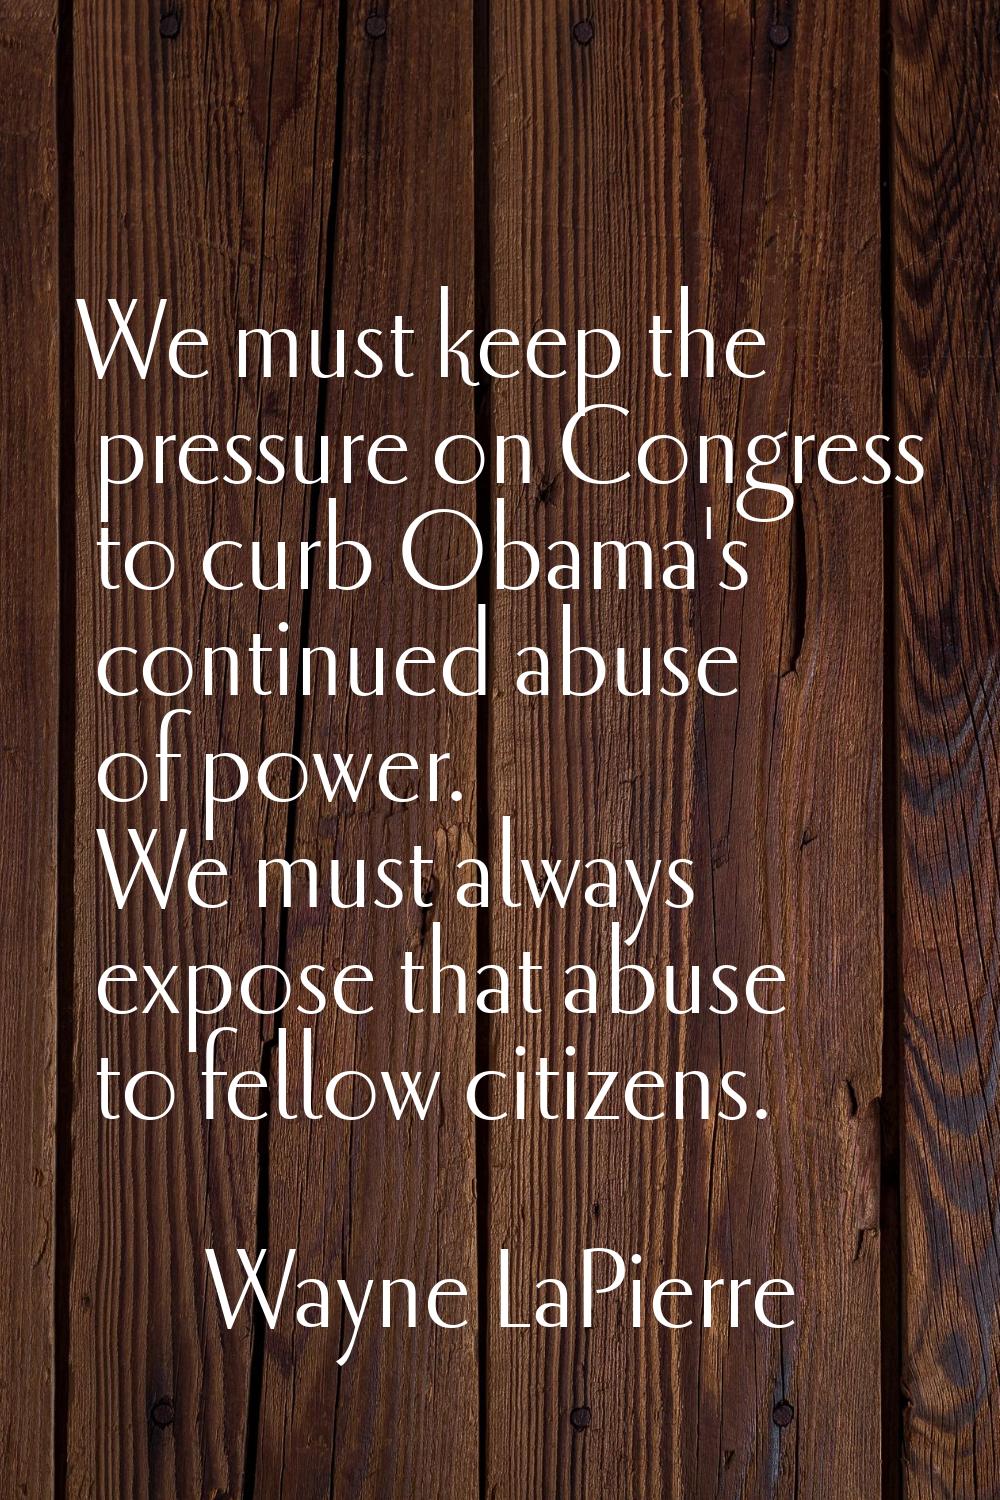 We must keep the pressure on Congress to curb Obama's continued abuse of power. We must always expo